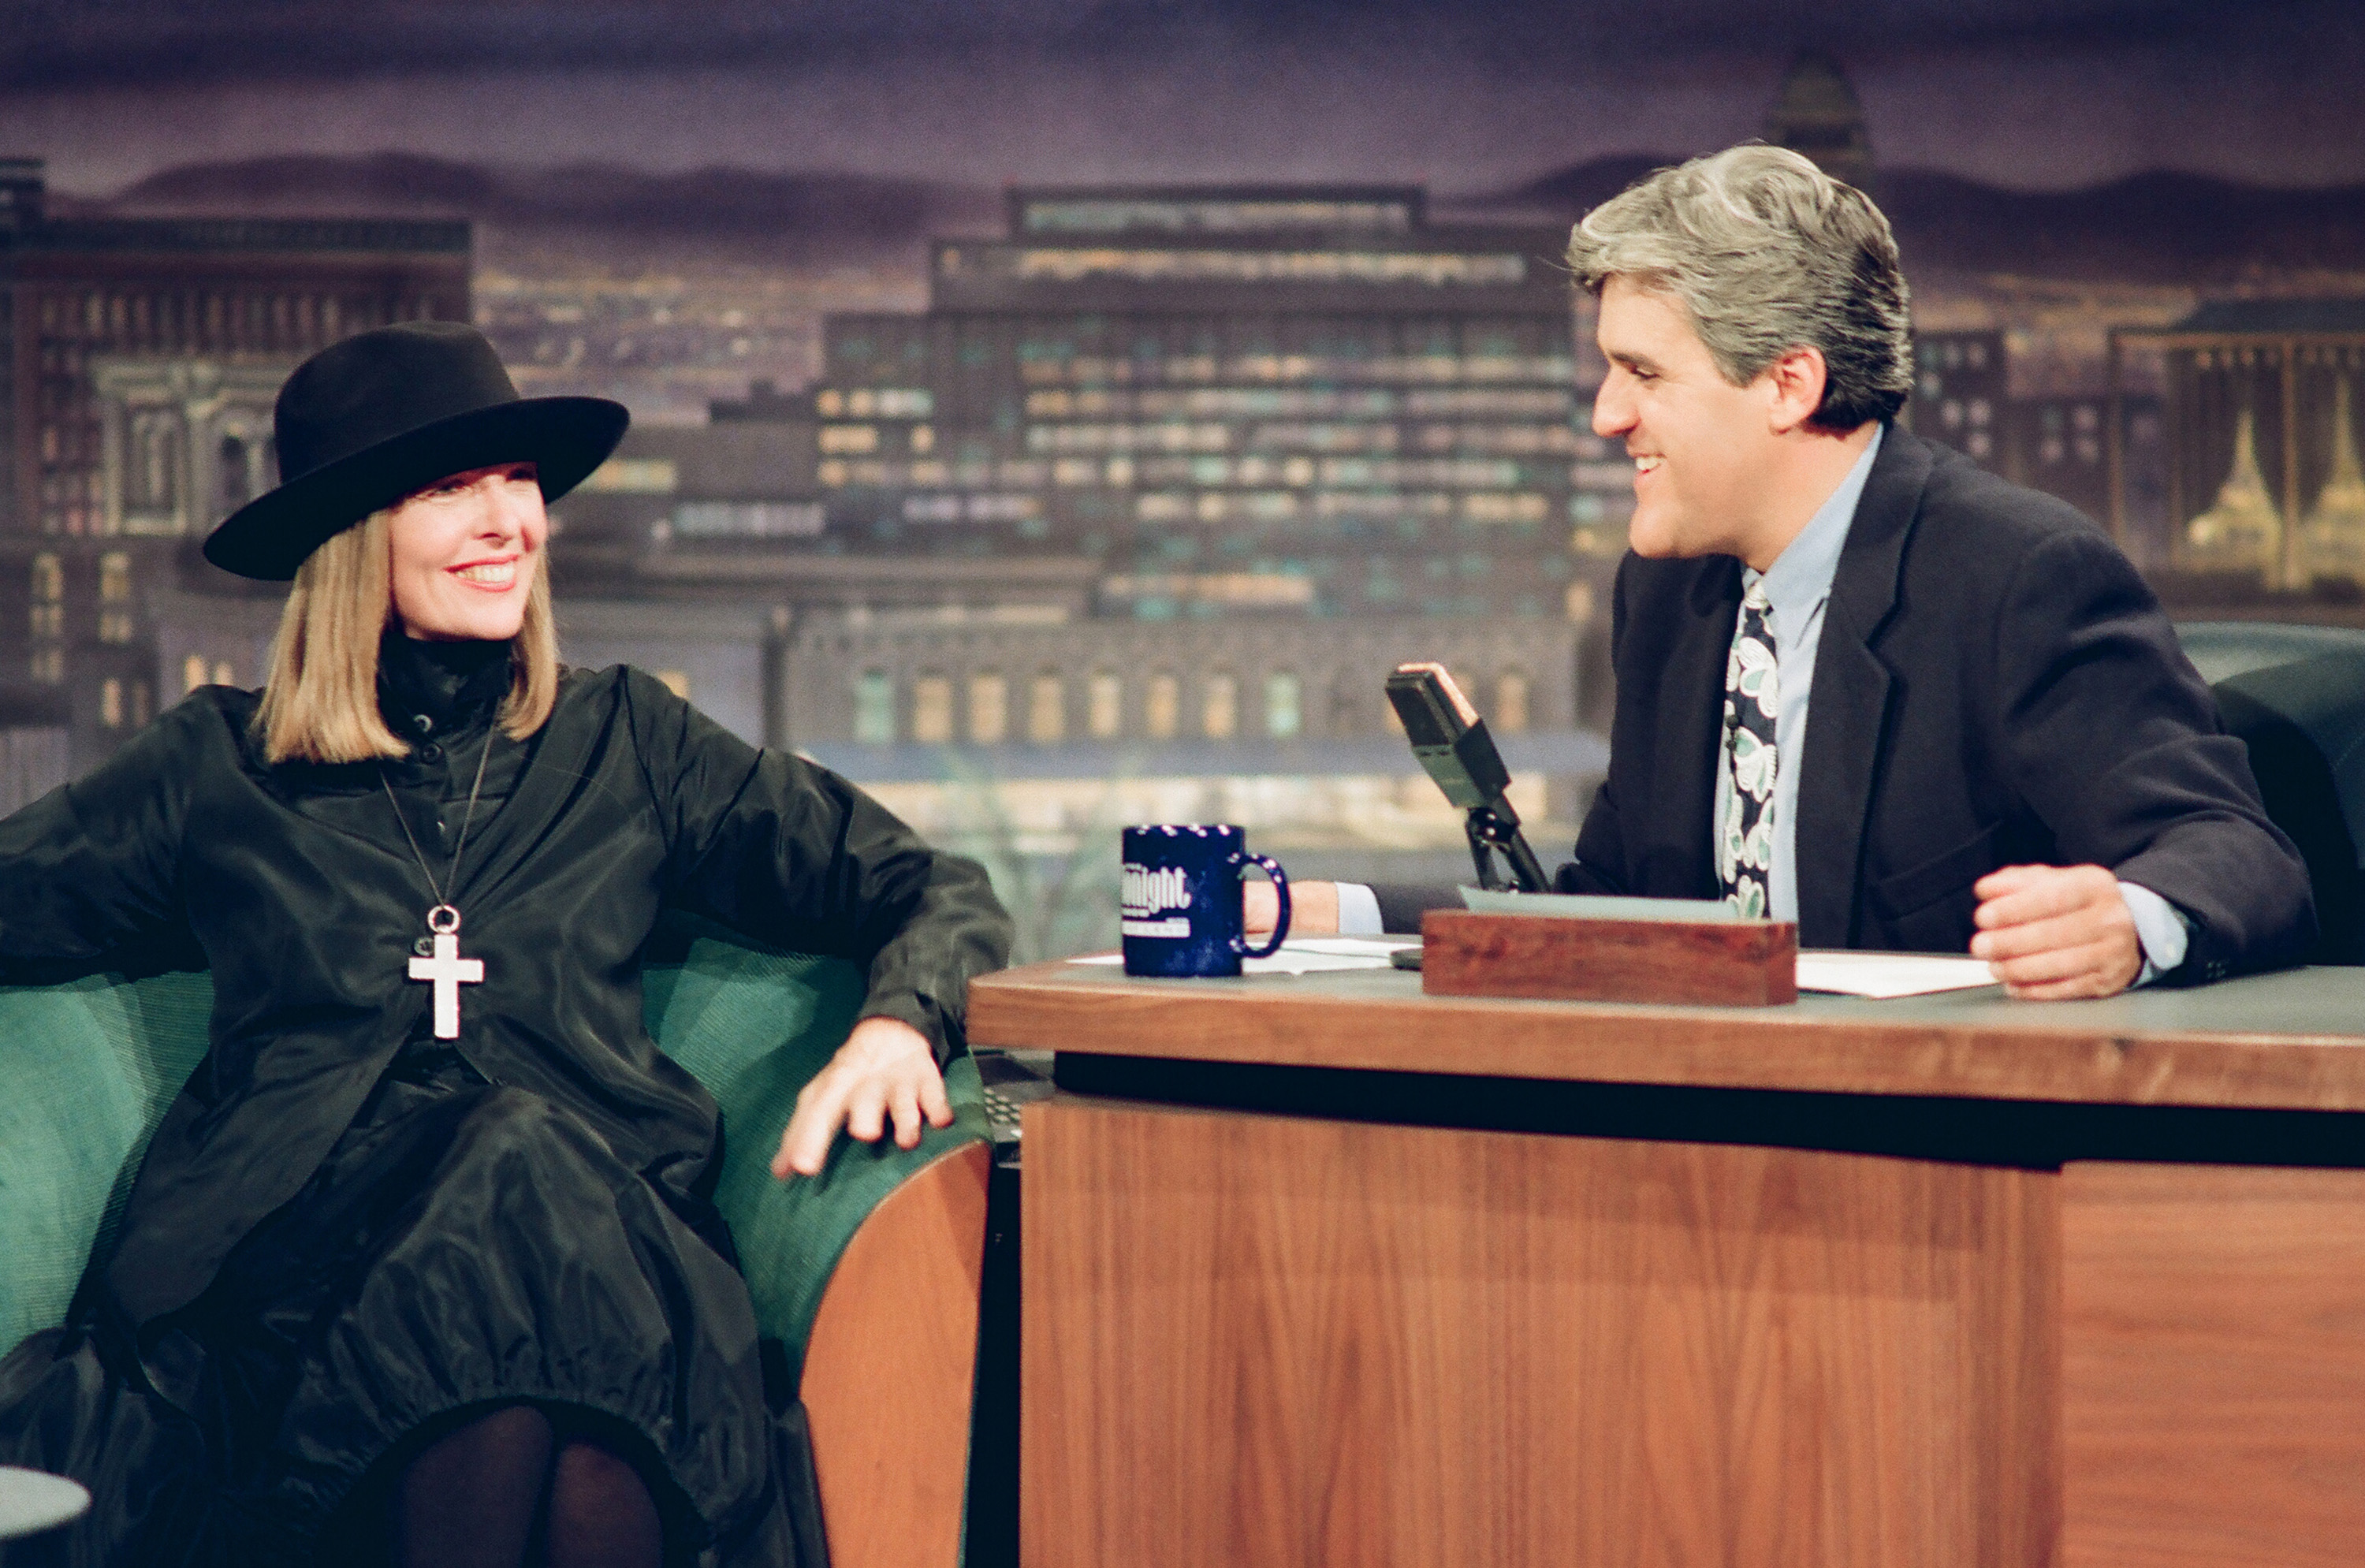 Diane Keaton during an interview with host Jay Leno on "The Tonight Show" on August 27, 1993 | Source: Getty Images